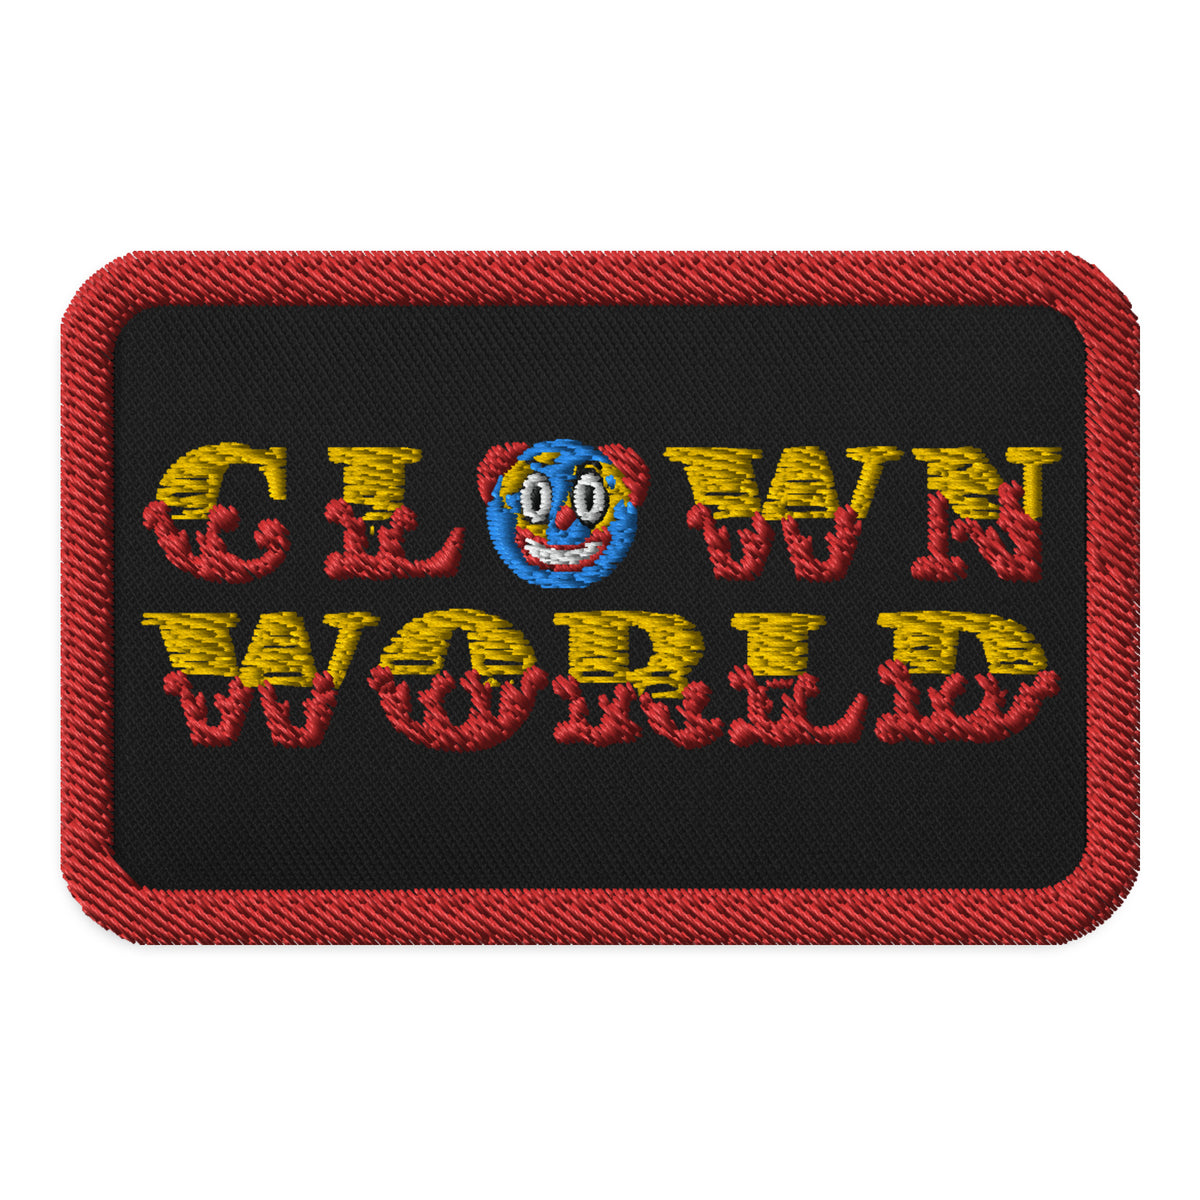 Clown World Embroidered Morale Patch